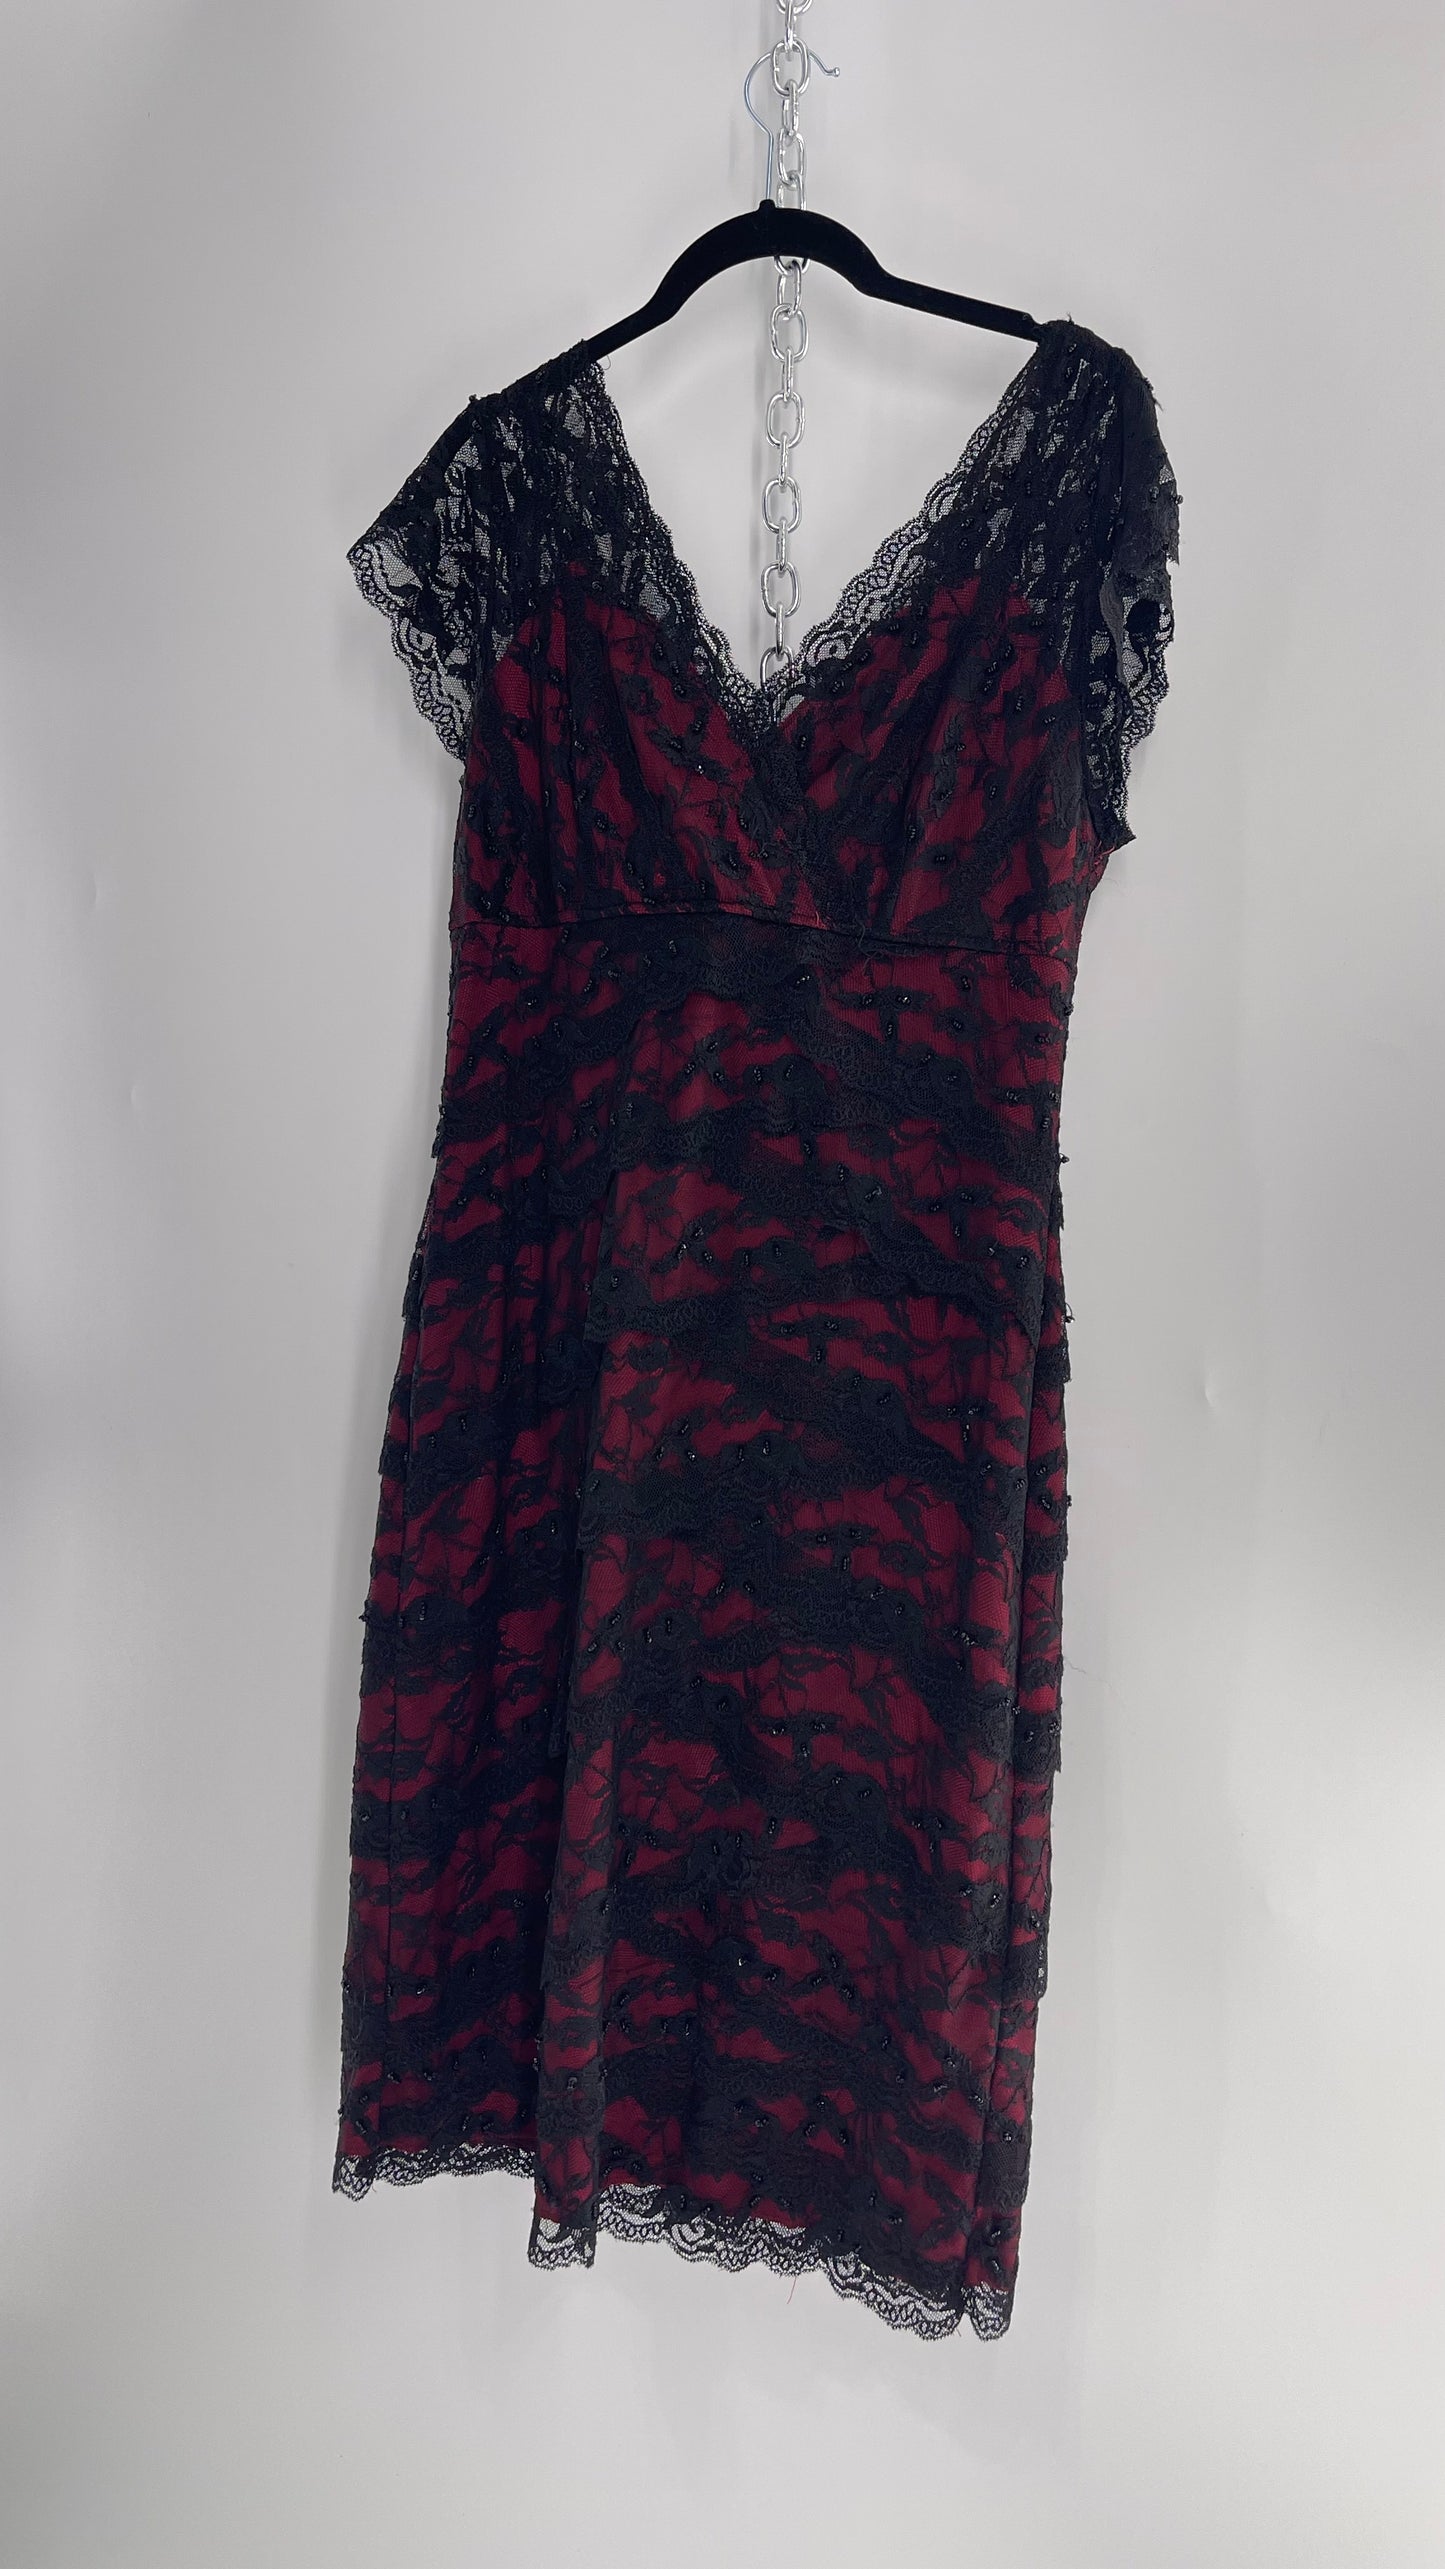 Vintage Marina Vampira Mídi Dress with Beading and Scalloped Black Lace Over Red Underlay (12) (Consigned)